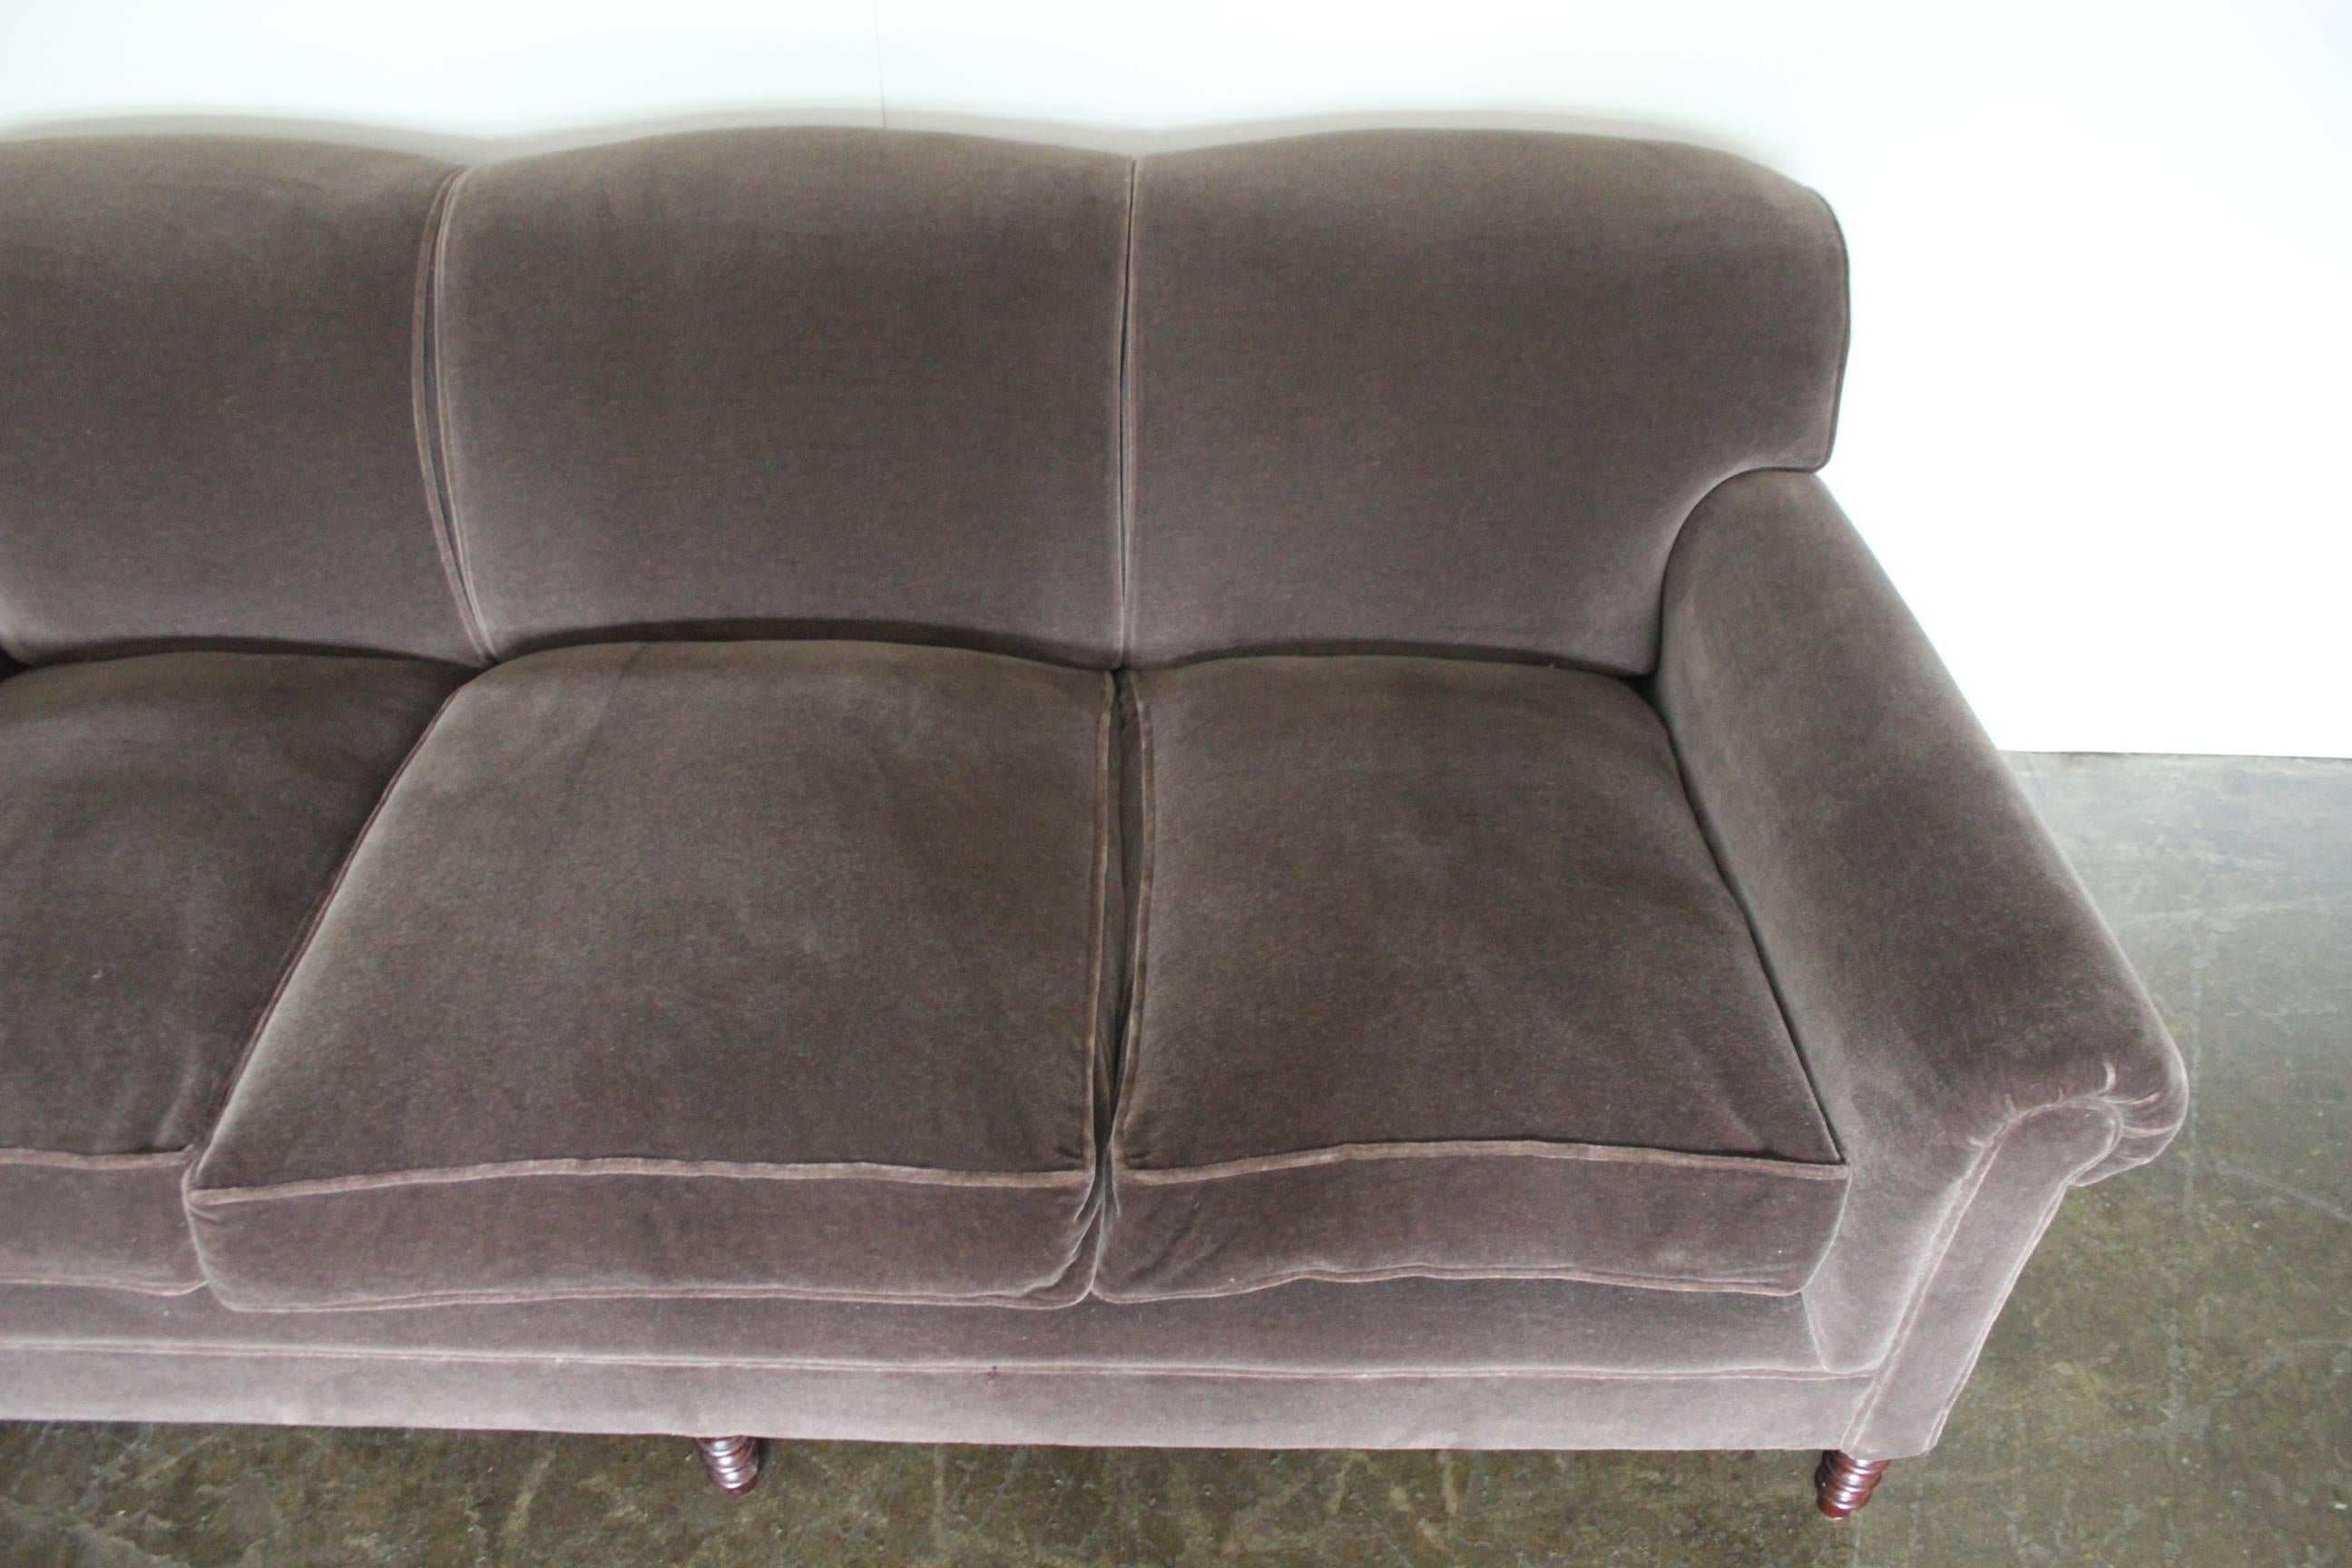 Pair of George Smith Signature “Scroll-Arm” Three-Seat Sofas in “Mink” Mohair 1